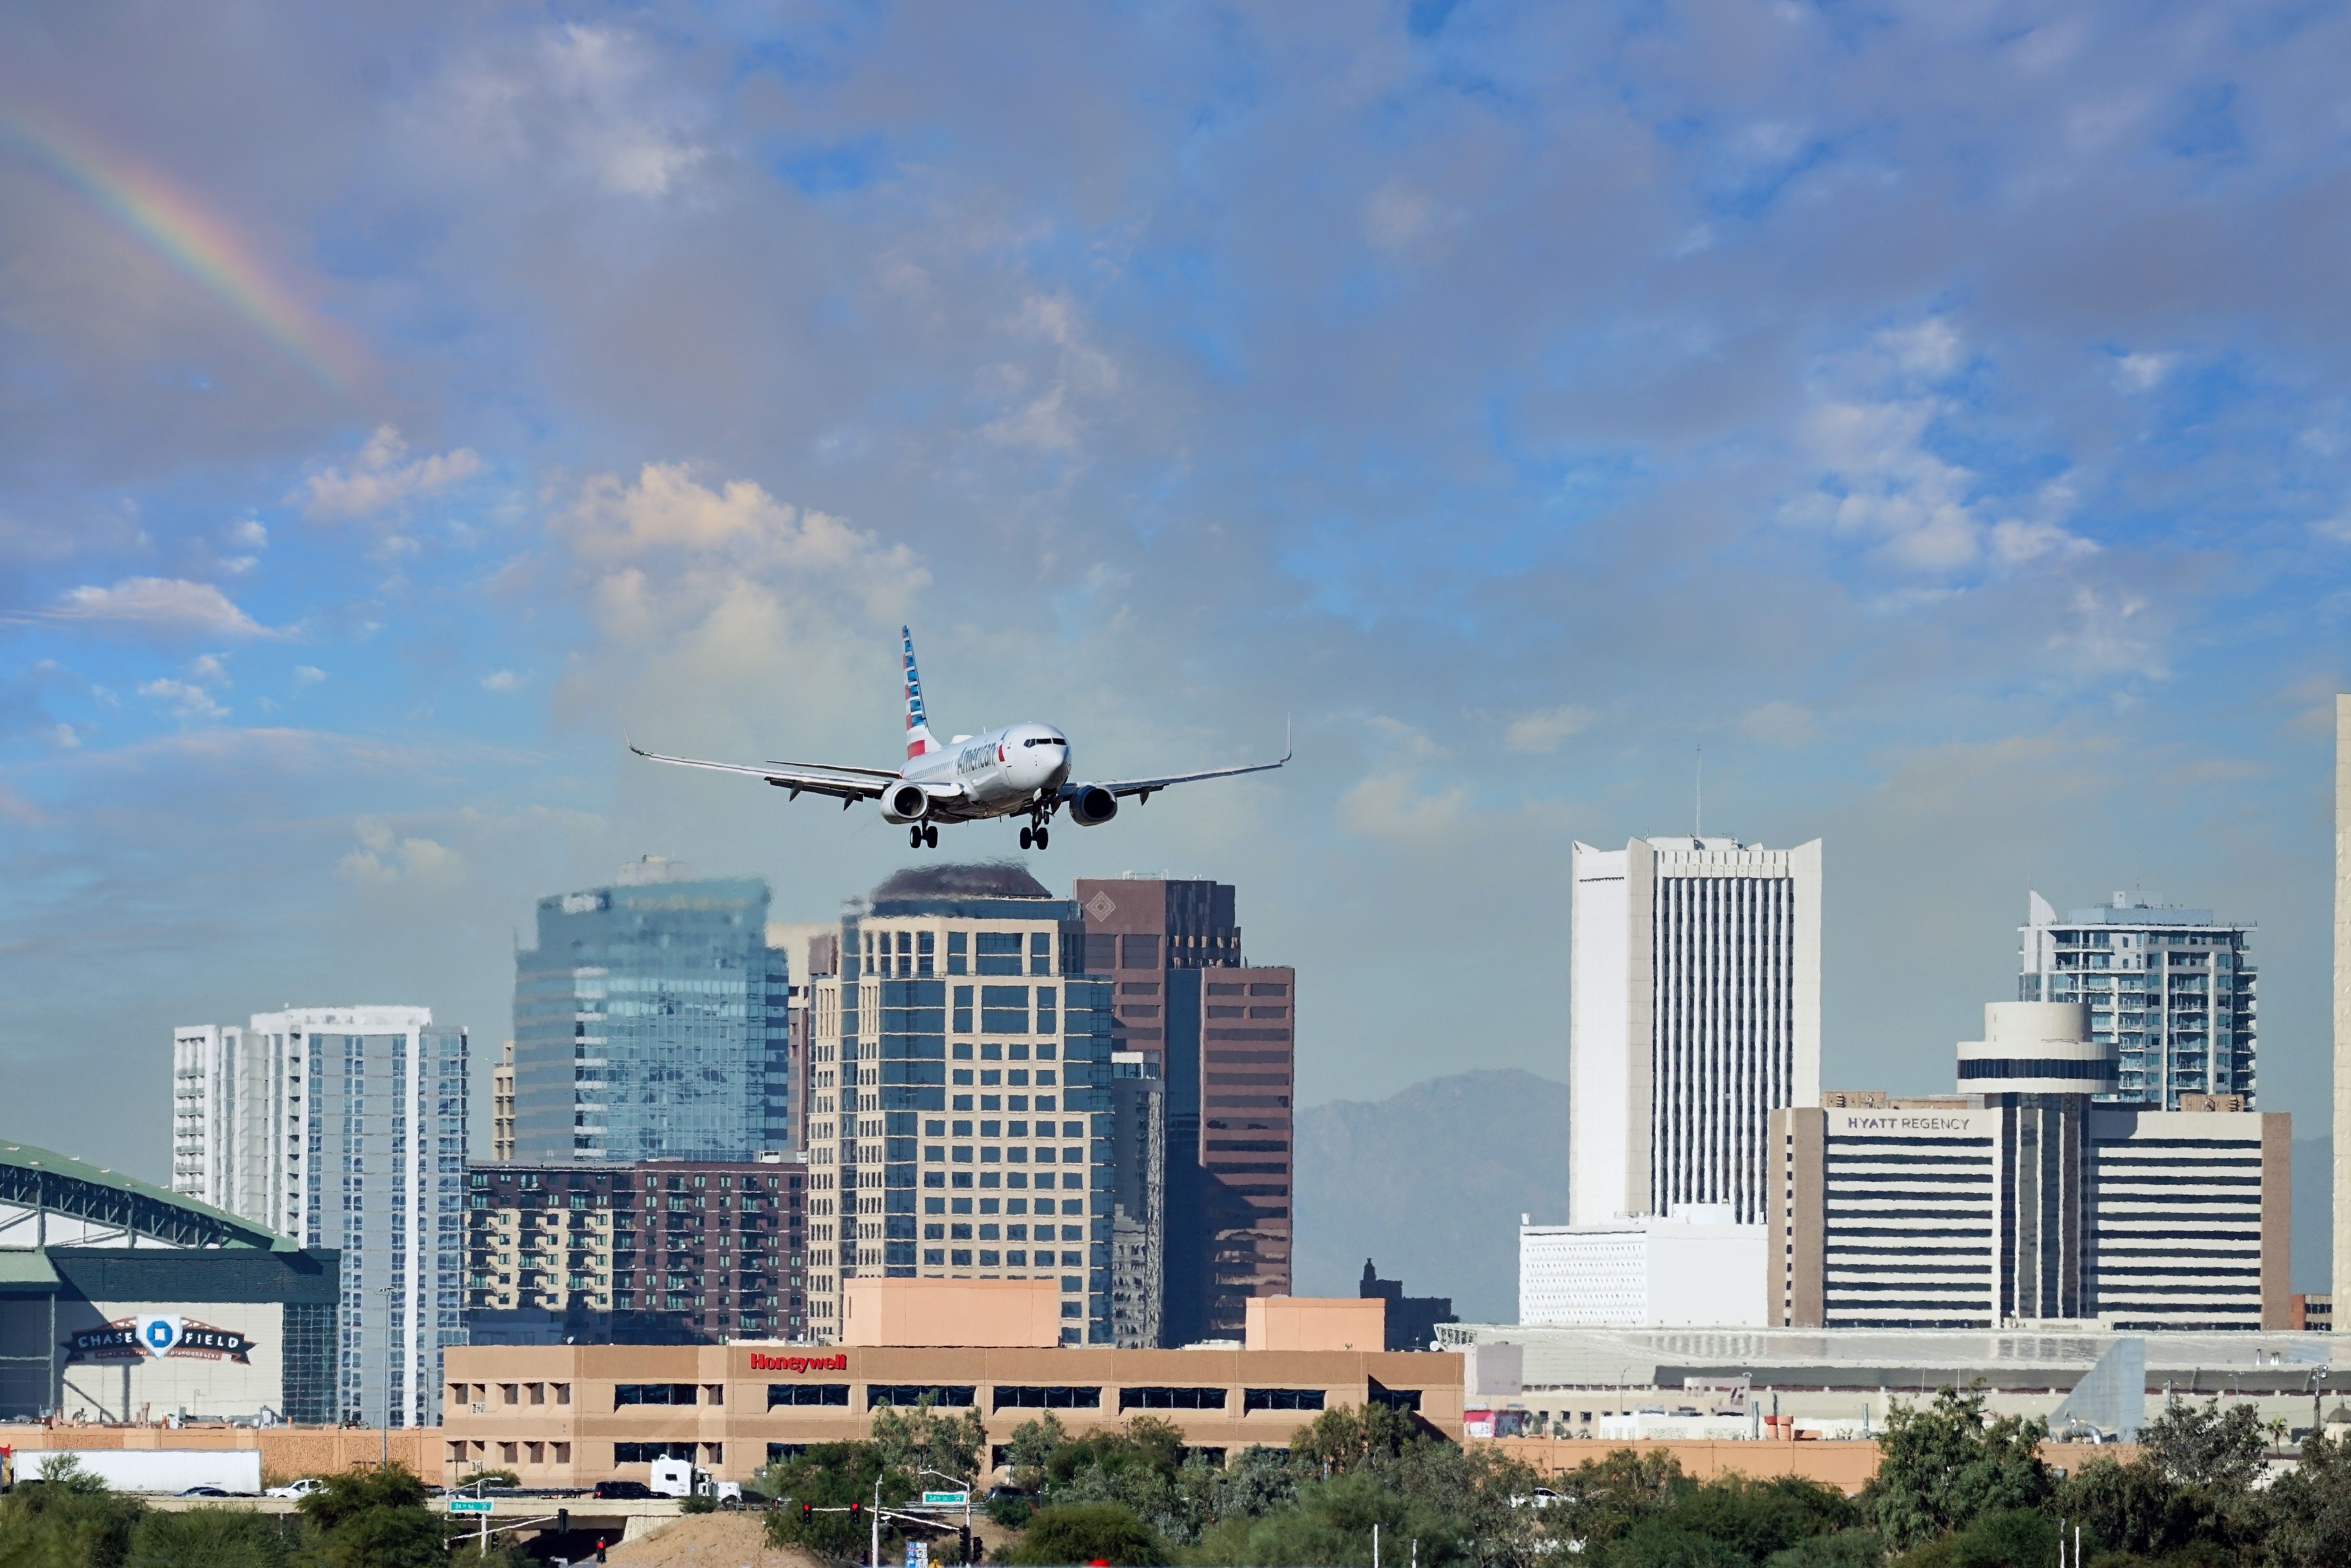 American Airlines Boeing 737-800 on approach at Phoenix Sky Harbor International Airport with skyline of Phoenix in background.